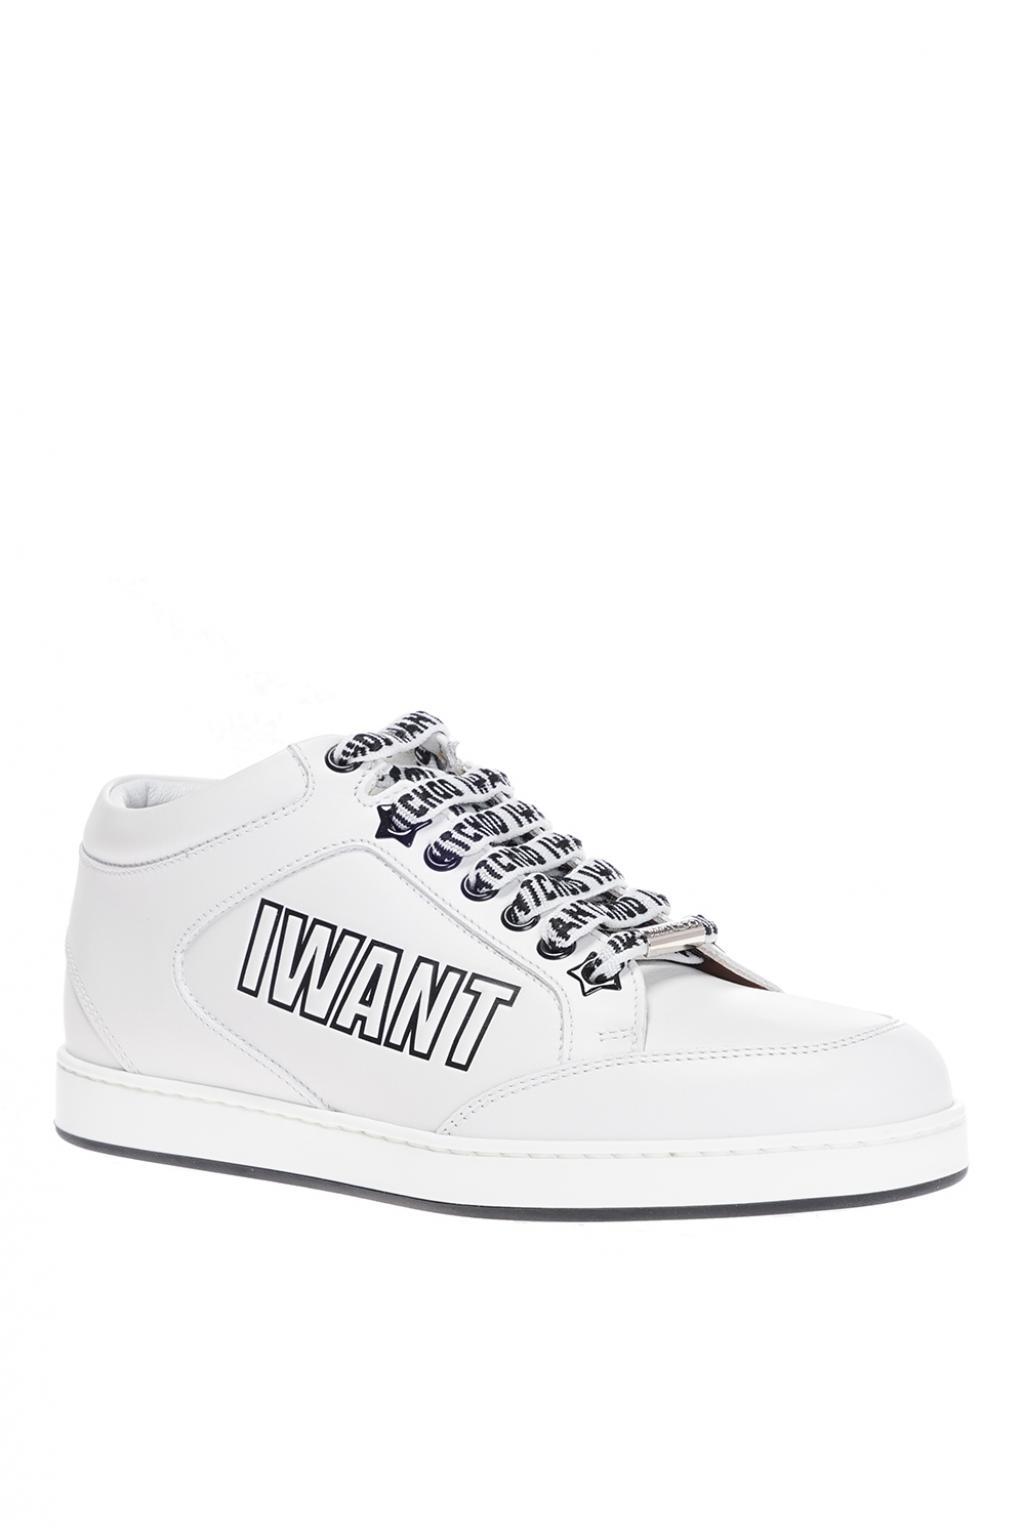 Jimmy Choo Leather Sneakers Miami in White - Lyst